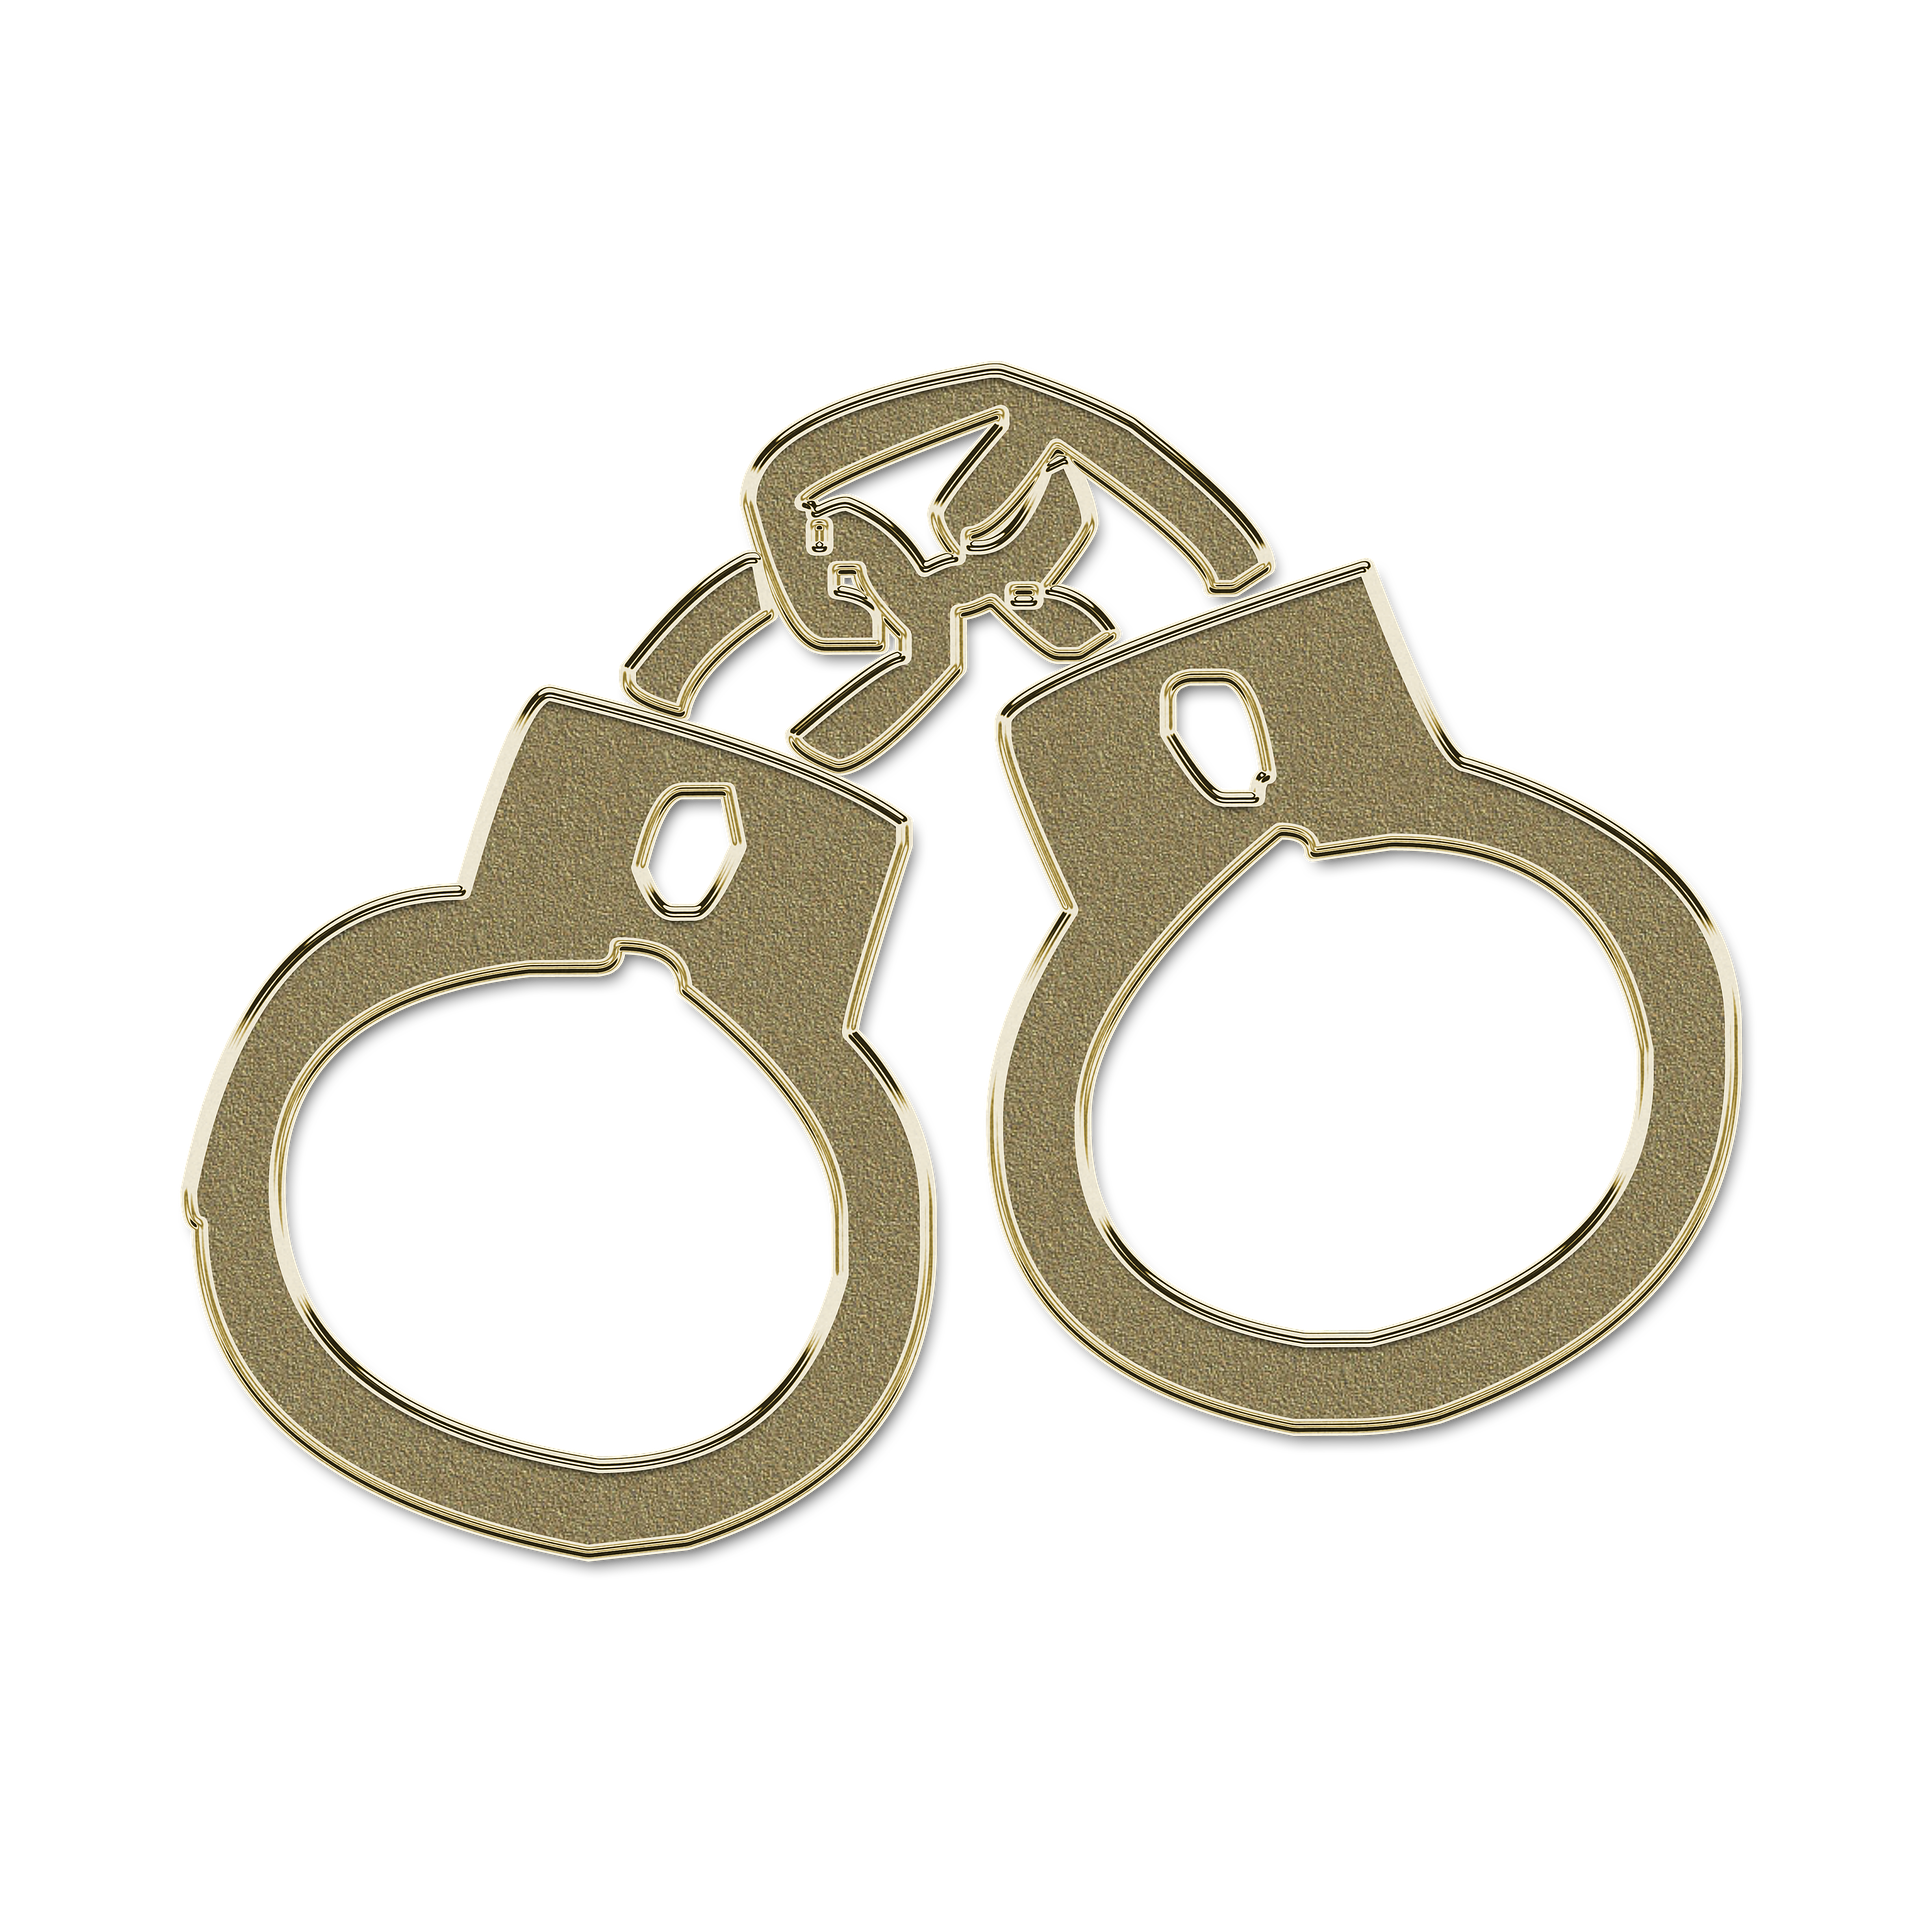 Should you free yourself of your golden handcuffs? Photo of golden handcuffs